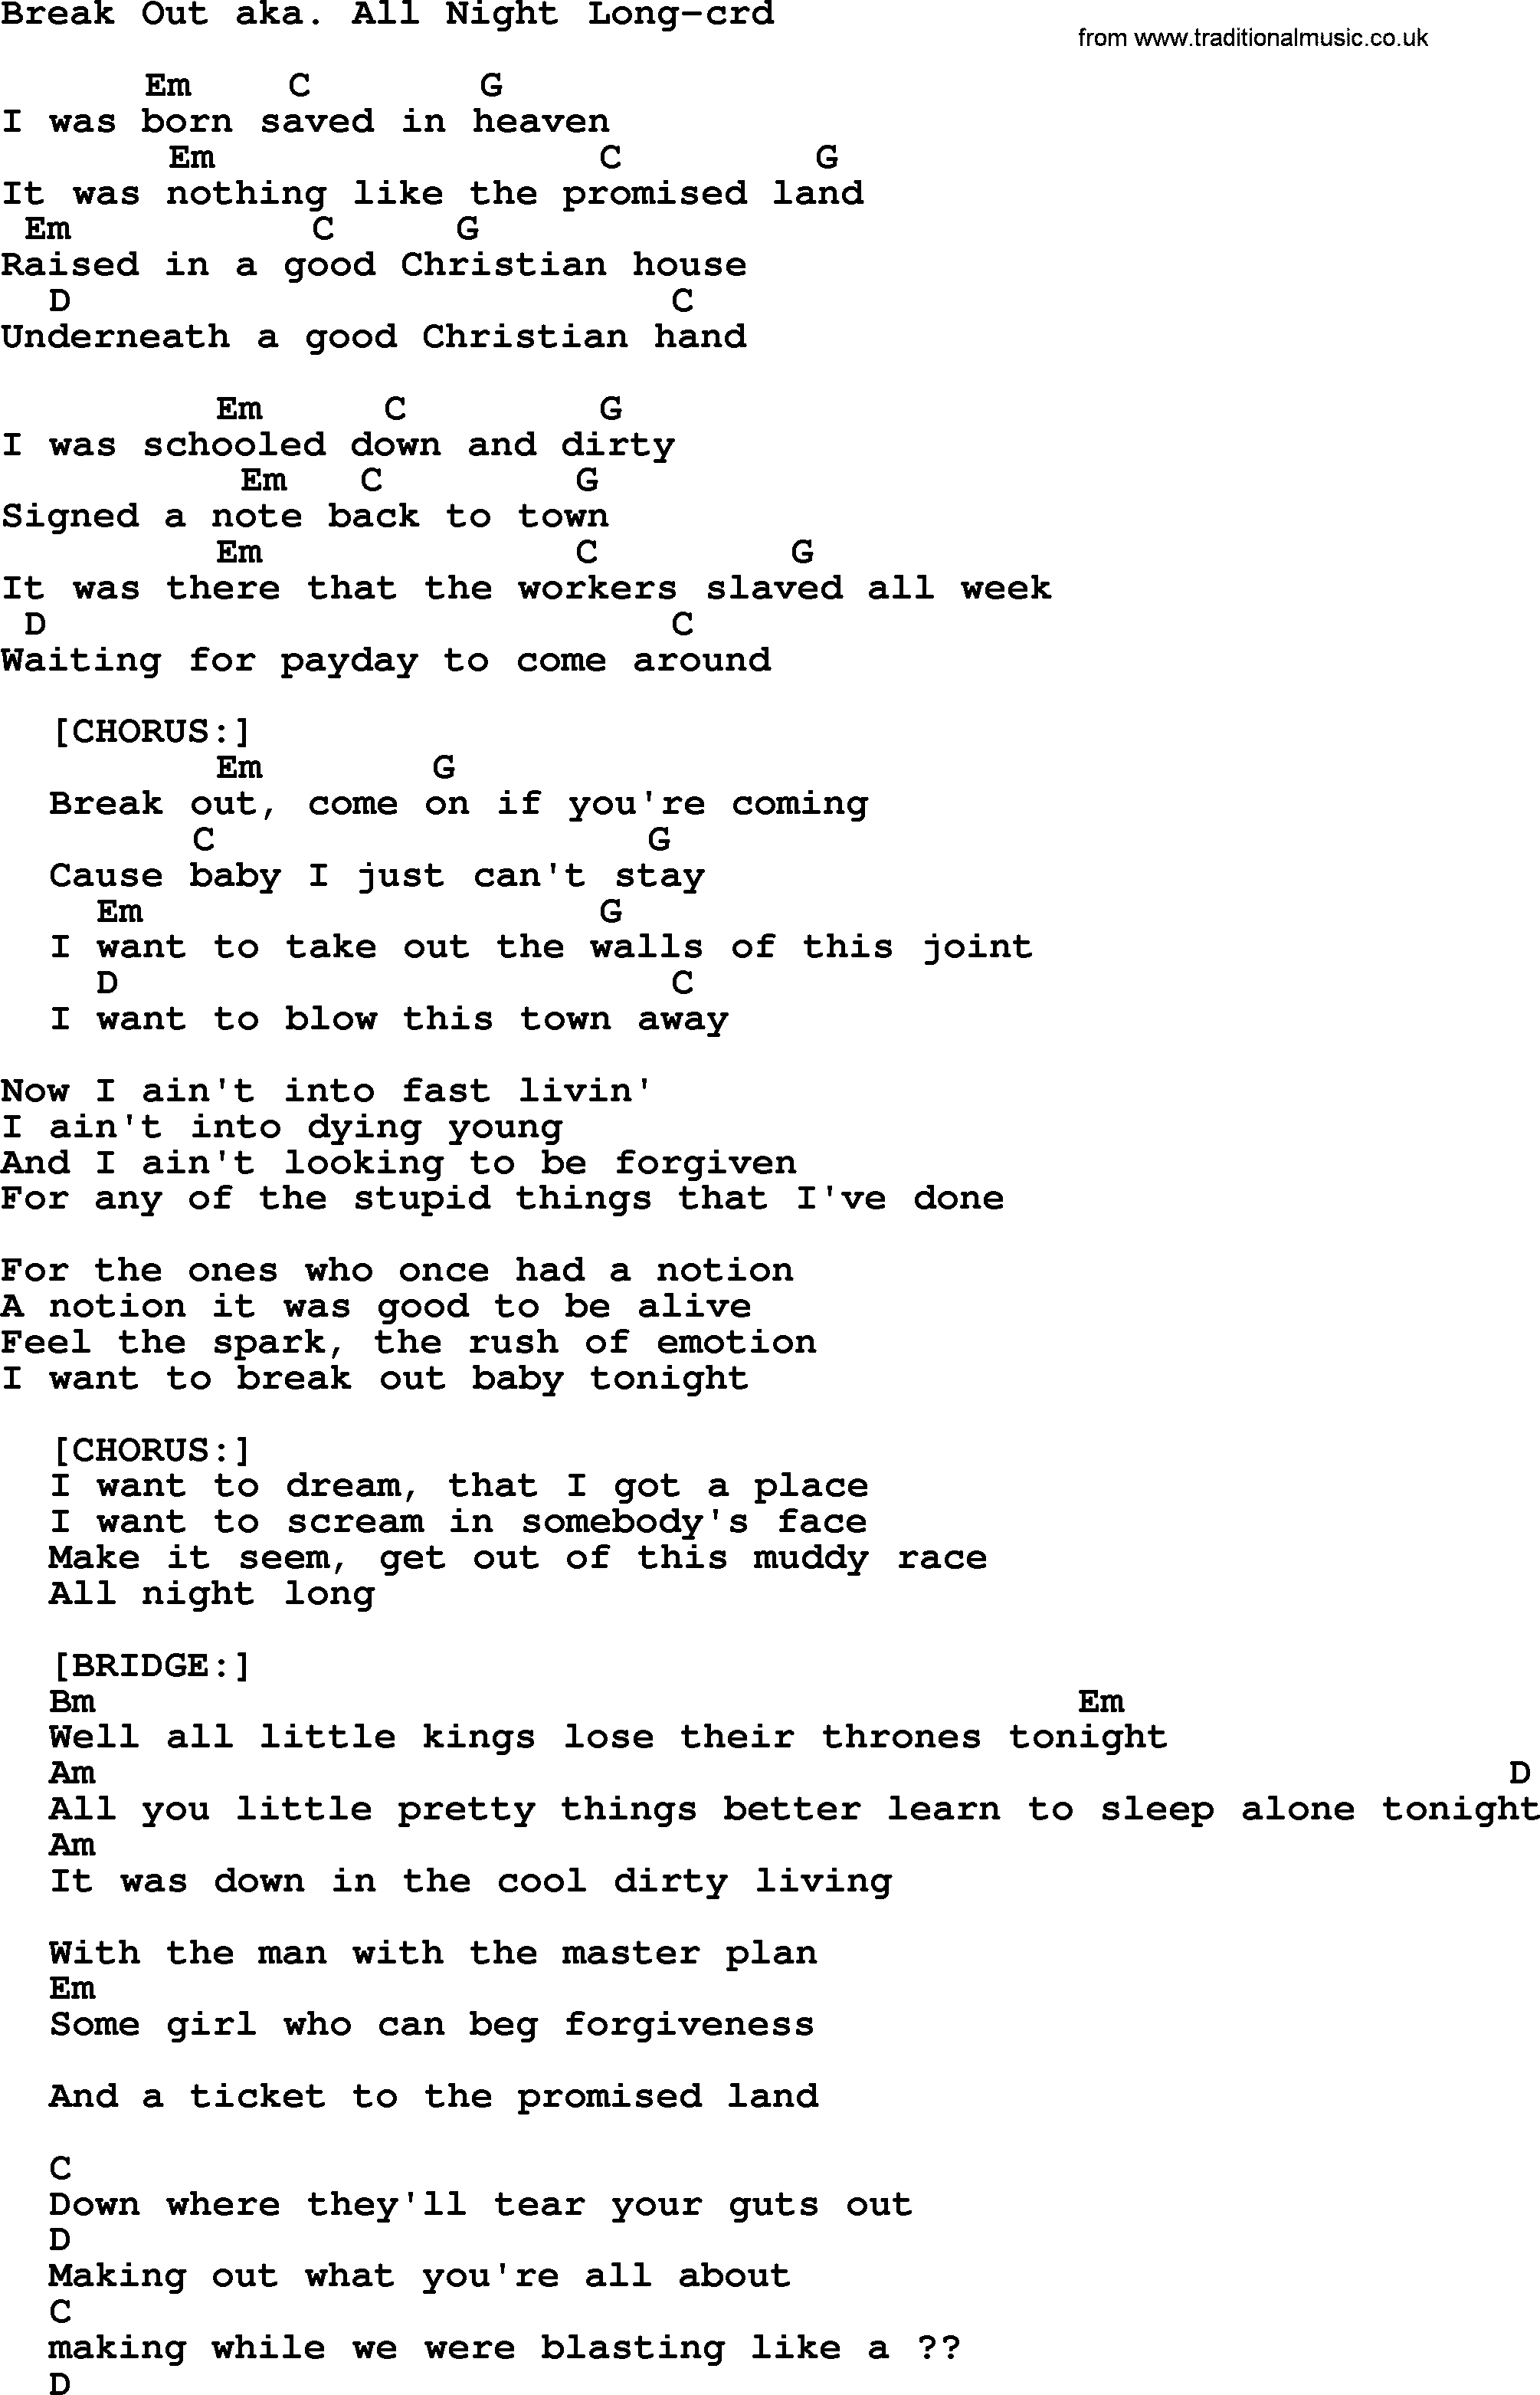 Bruce Springsteen song: Break Out Aka All Night Long, lyrics and chords